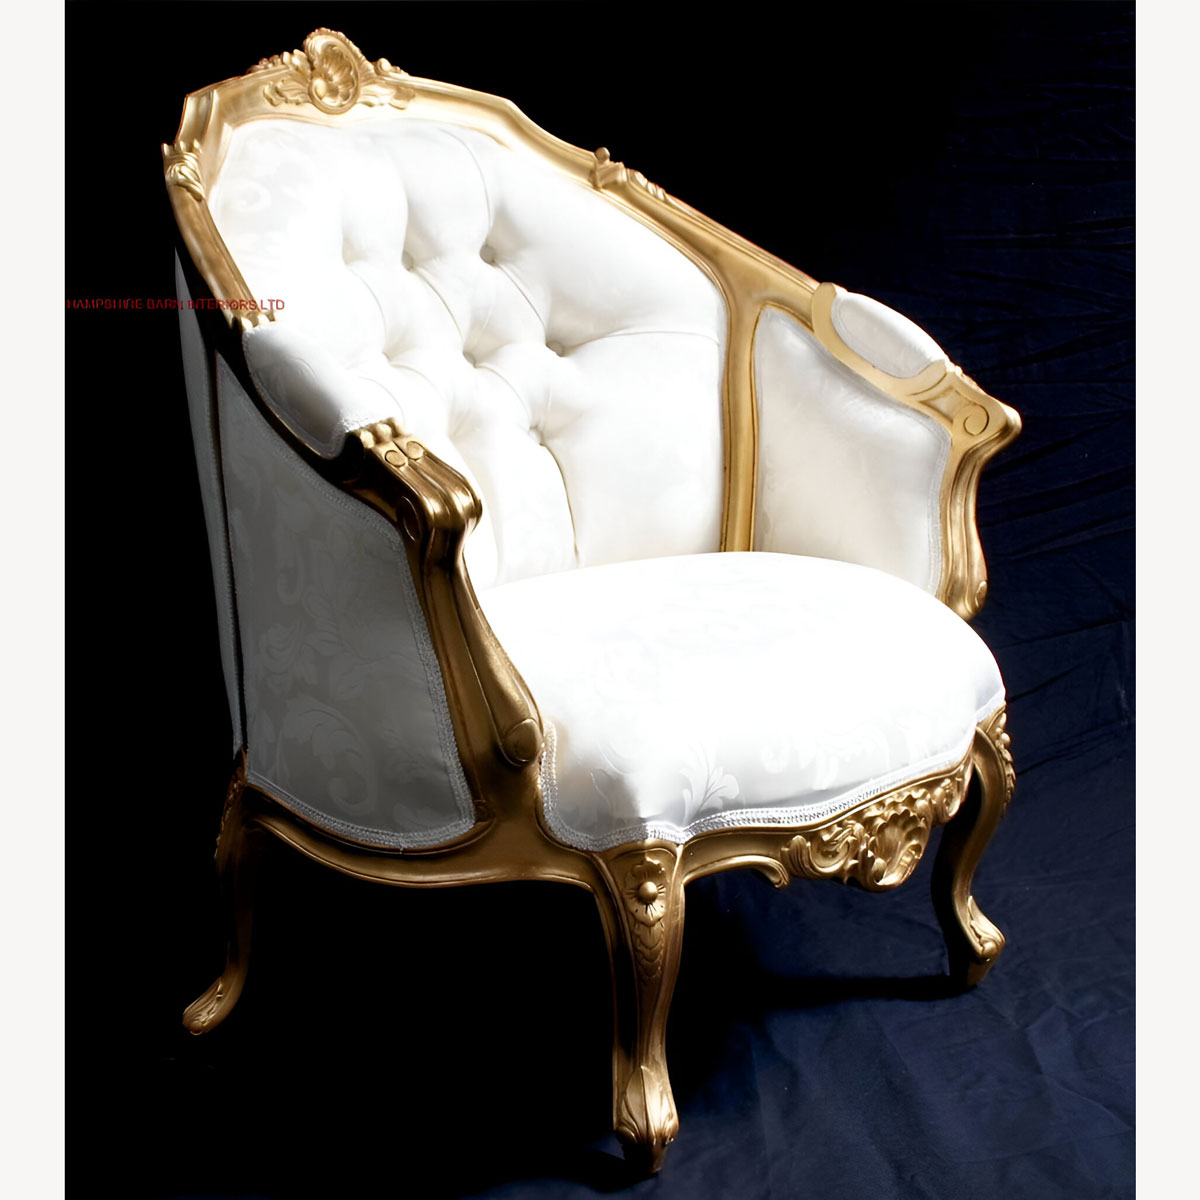 An Ascot Three Piece Salon Set Sofa Plus Two Armchairs Shown In Gold Leaf With Ivory Cream Fabric 4 - Hampshire Barn Interiors - An Ascot Three Piece Salon Set (Sofa Plus Two Armchairs) Shown In Gold Leaf With Ivory Cream Fabric -